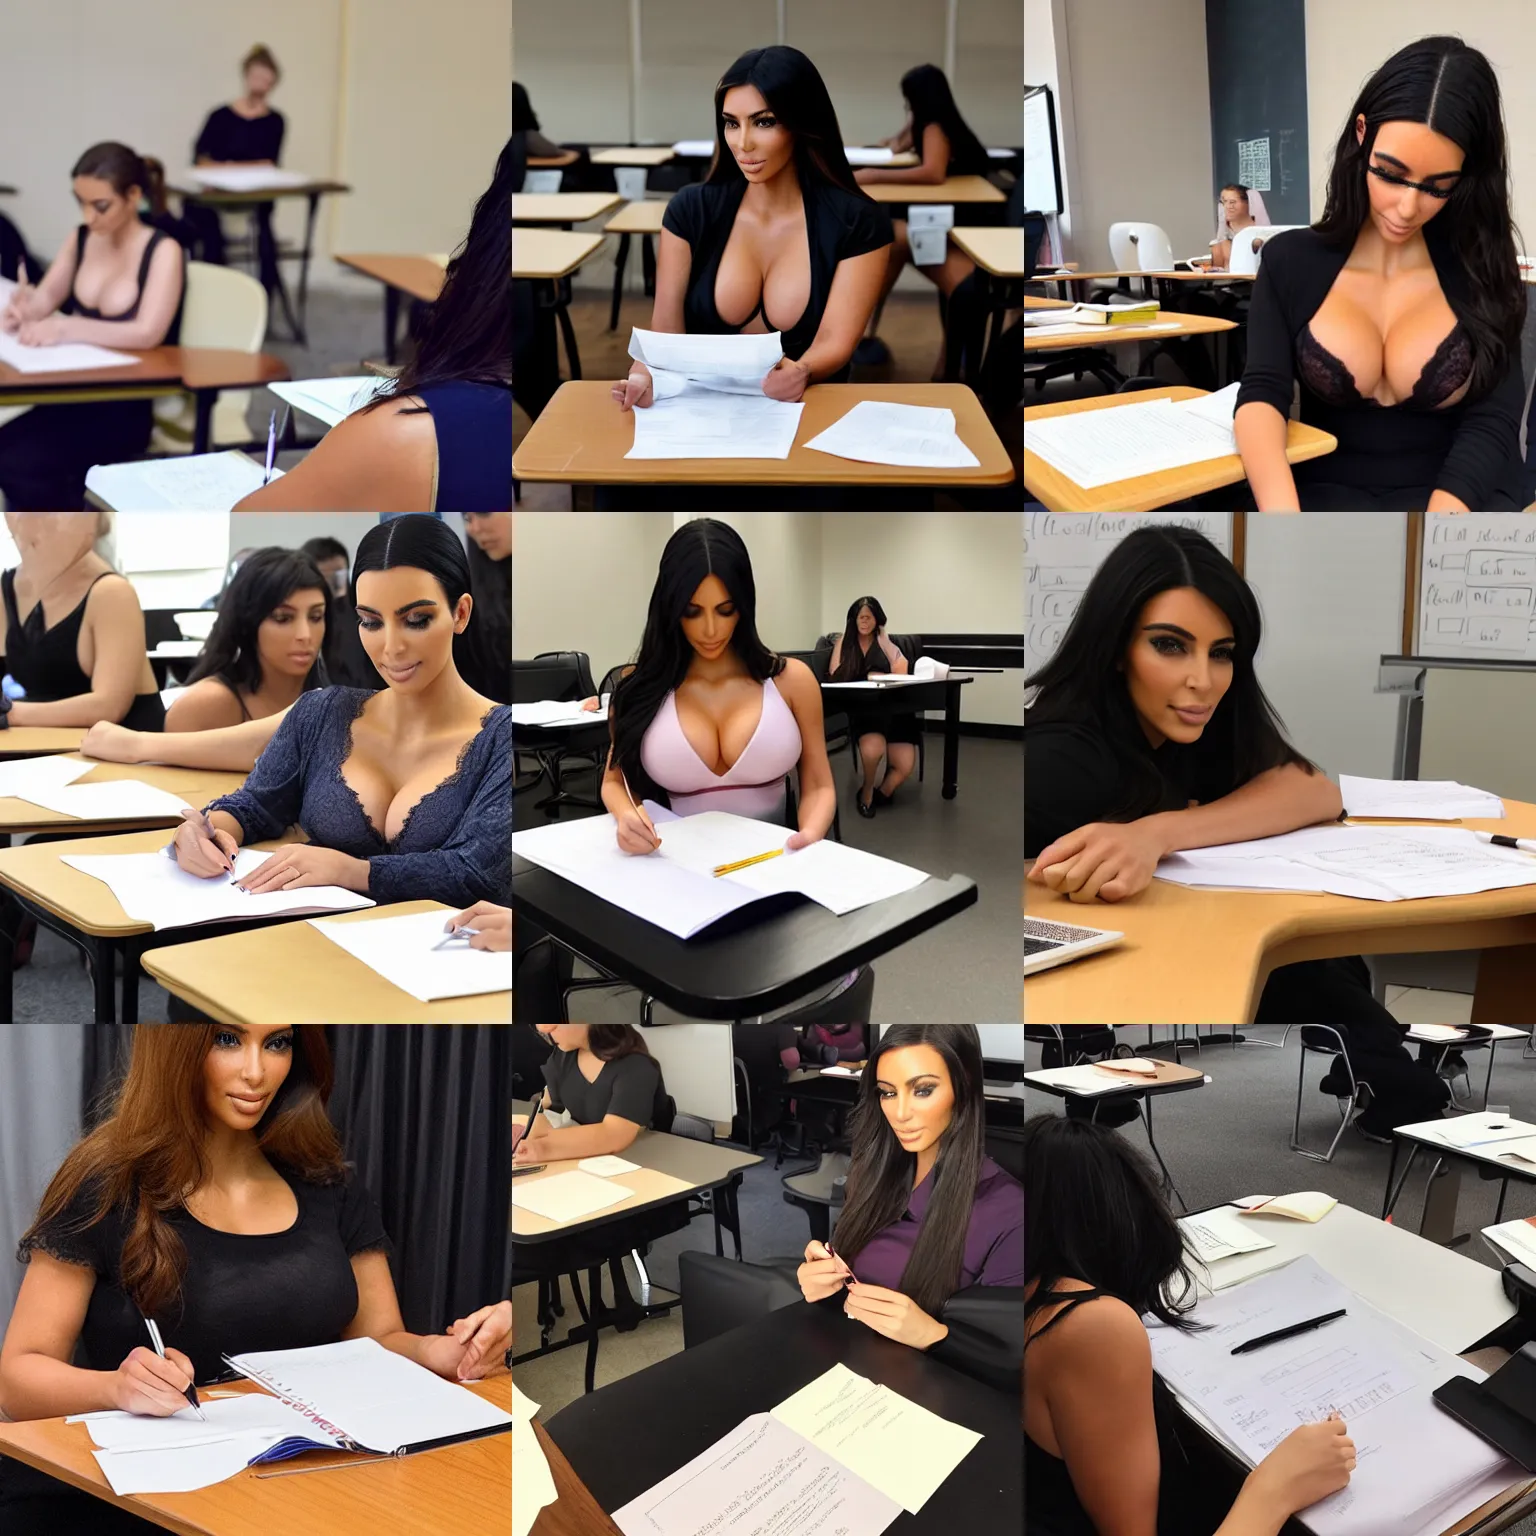 Prompt: a woman similar to kim kardashian and wearing lingerie reviewing student exams at a table